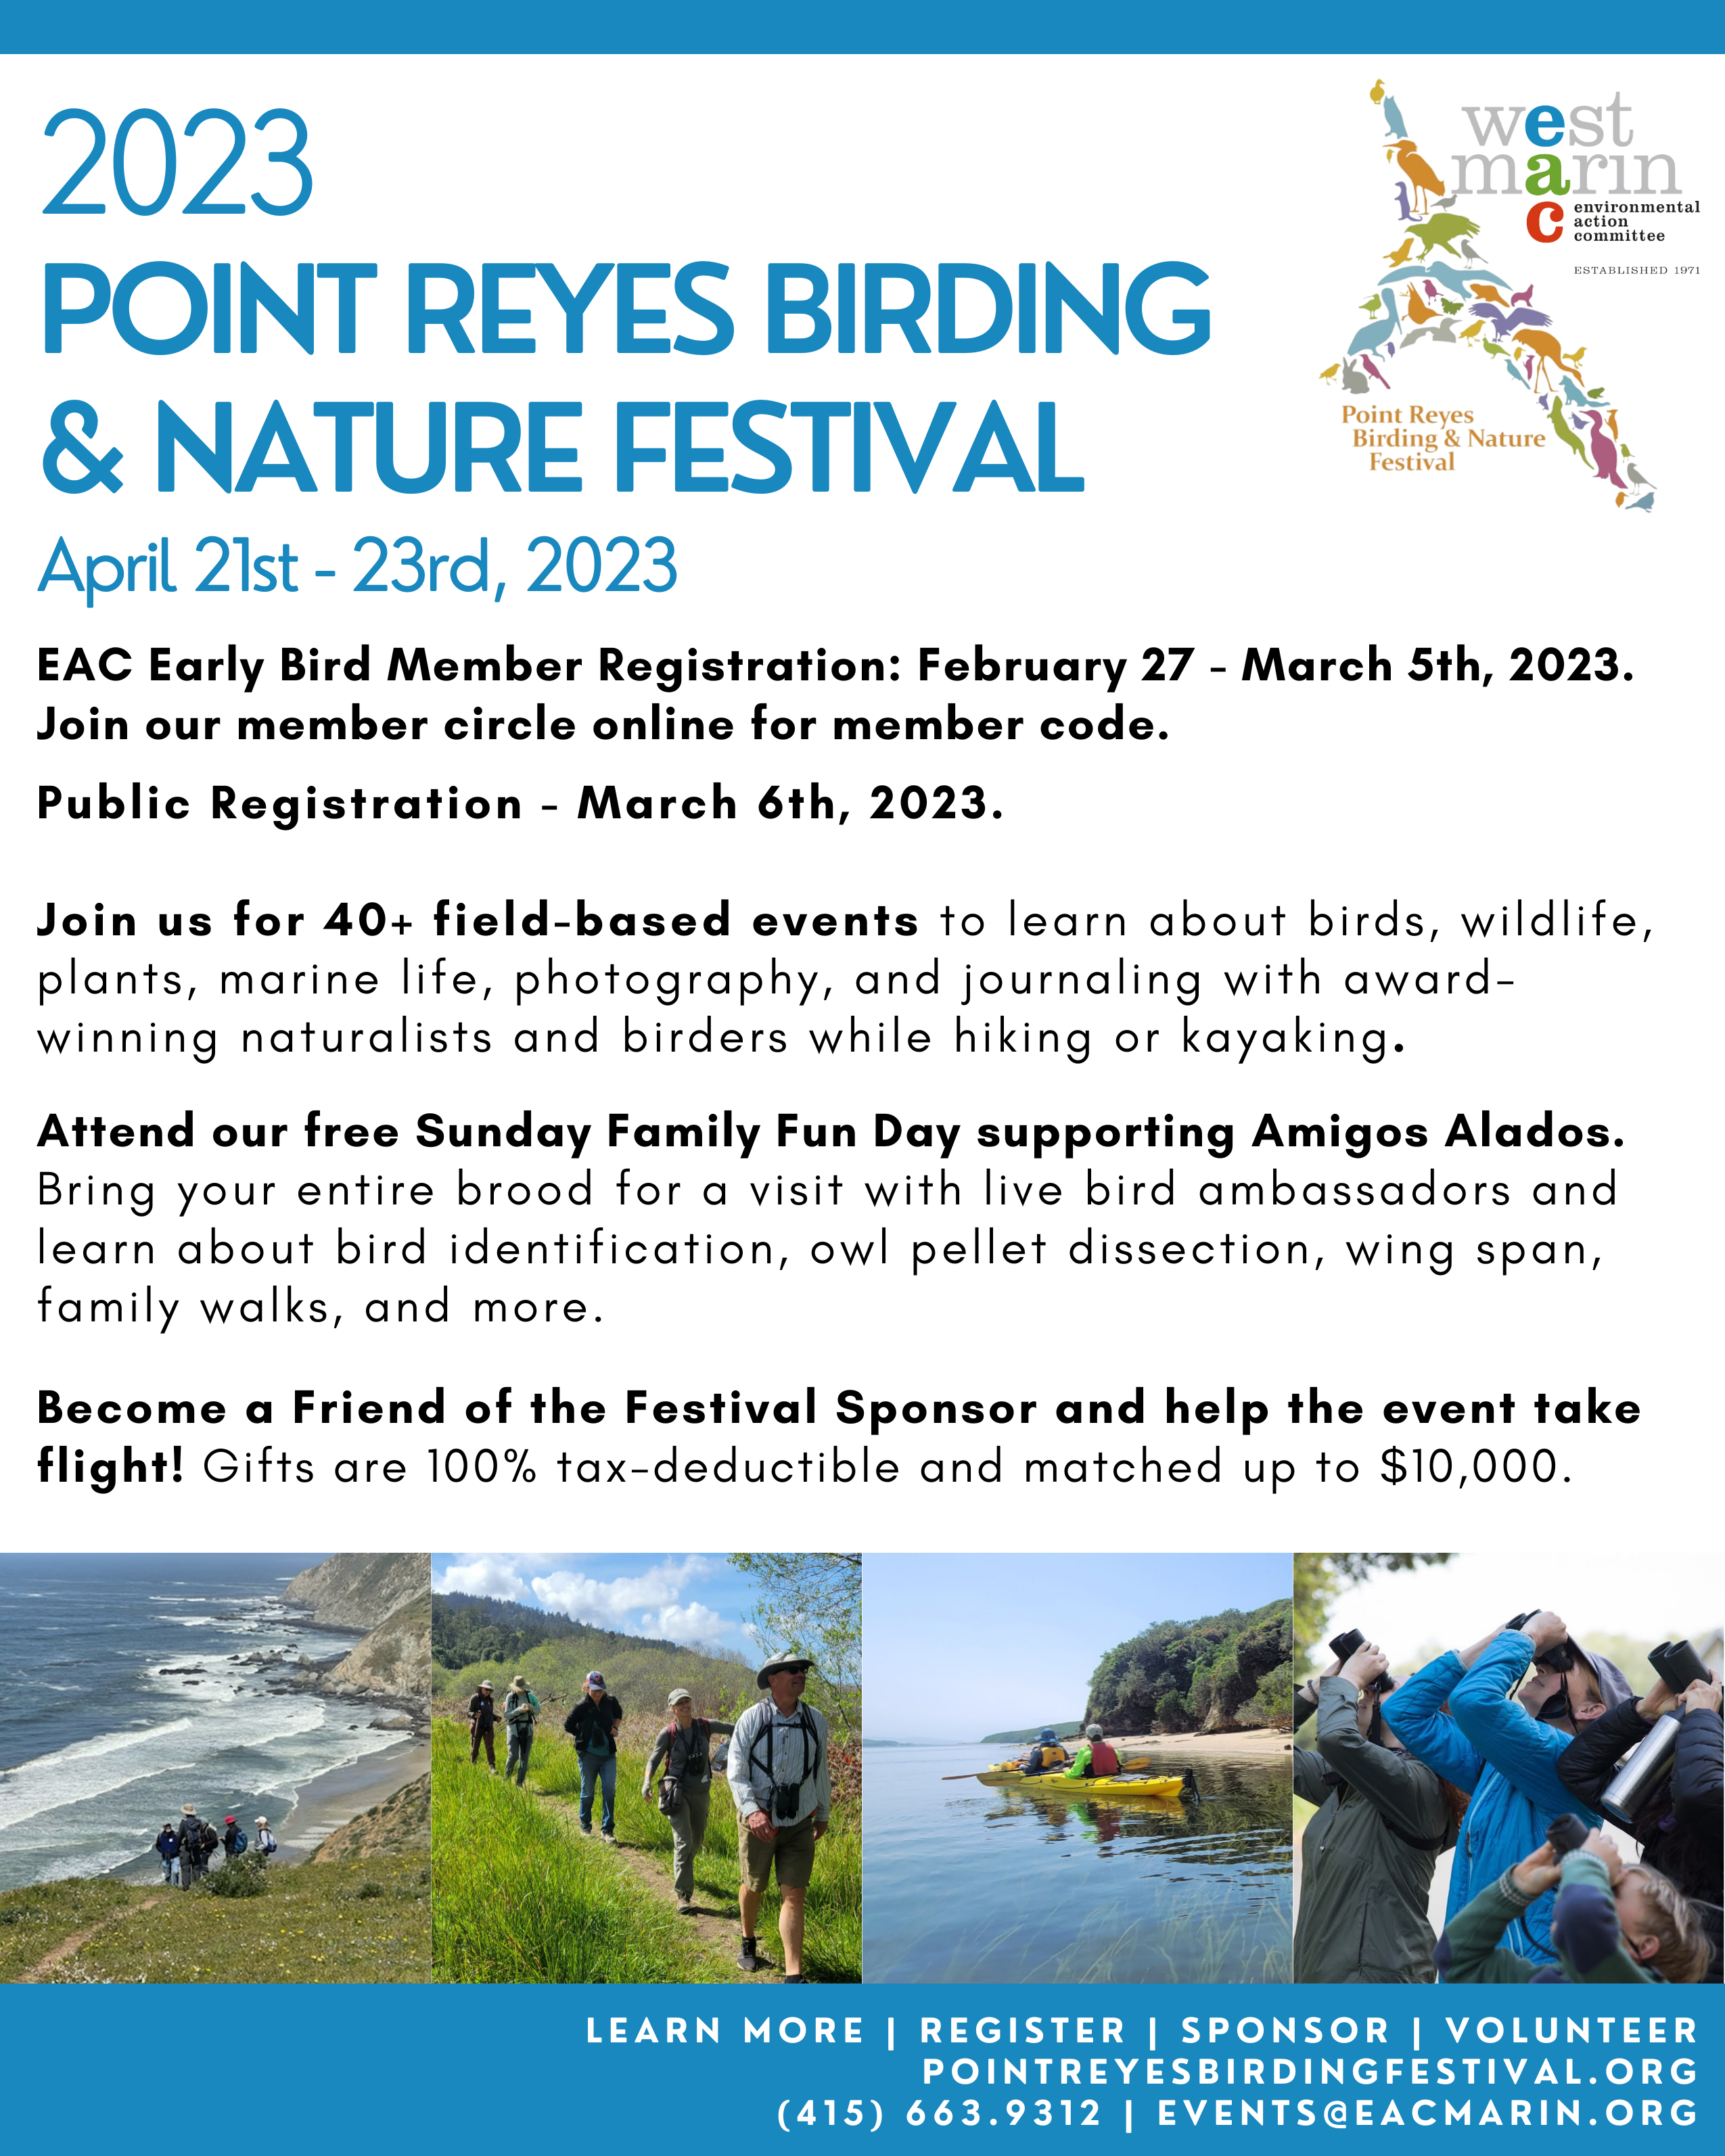 2023 Point Reyes Birding & Natue Festival Sharable Graphic